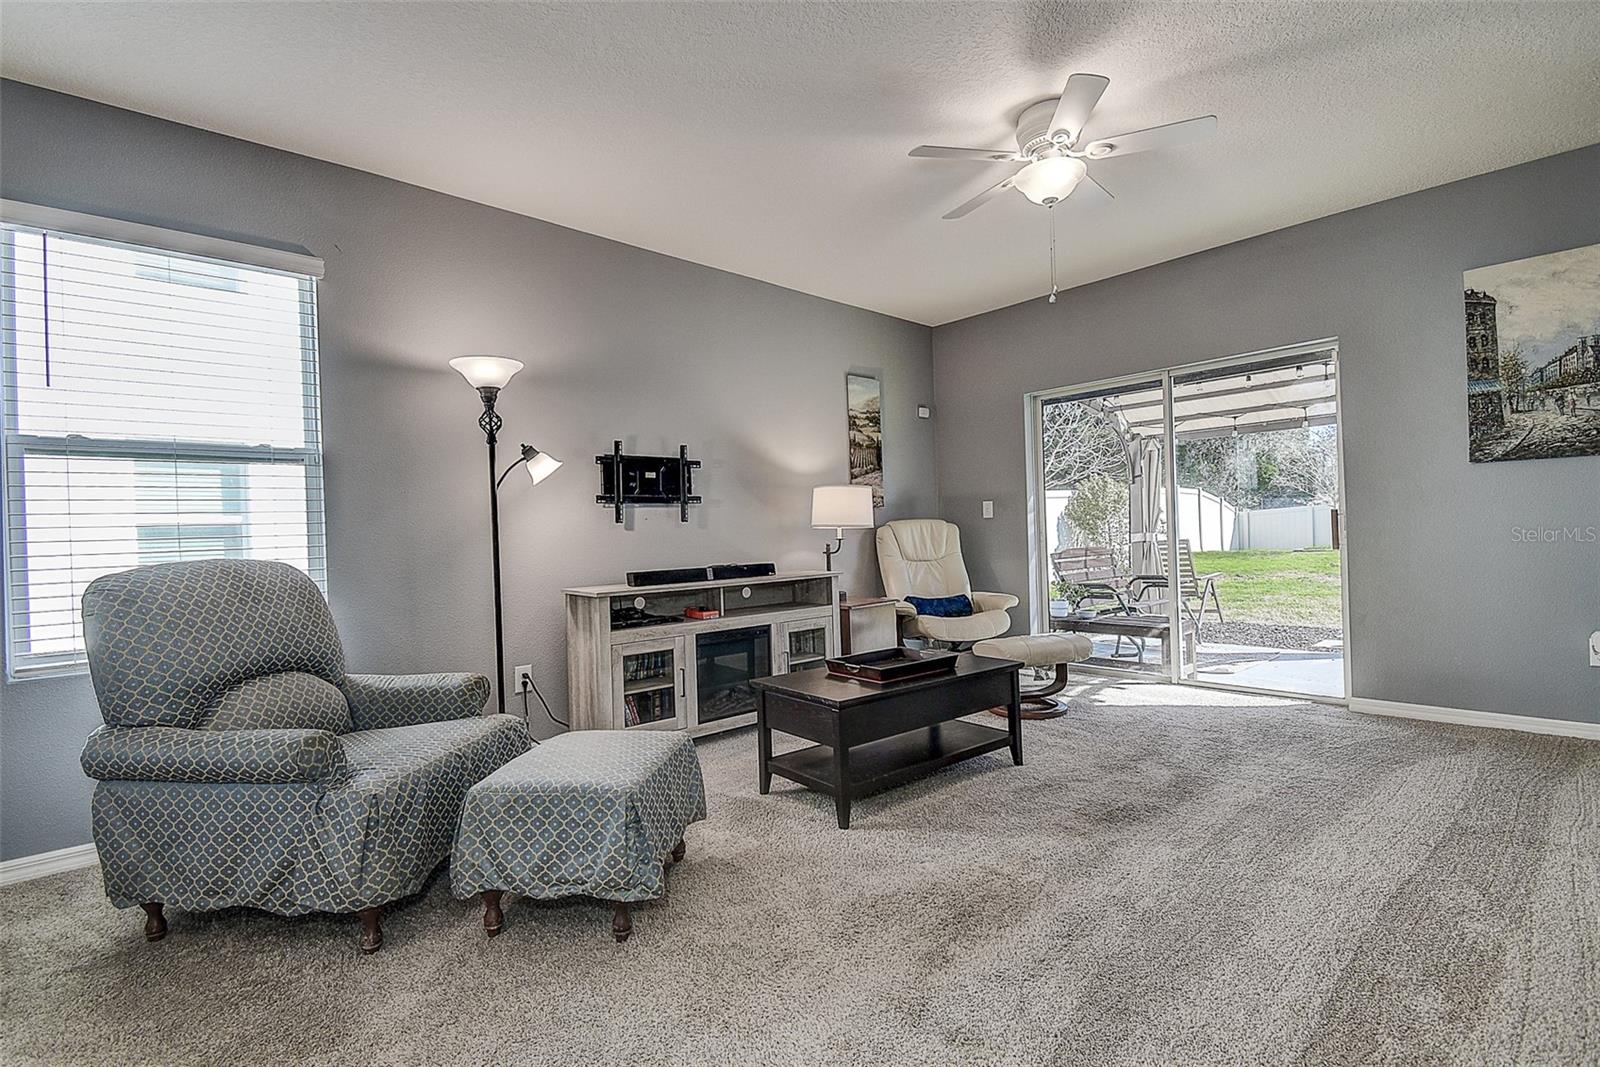 Plenty of room in the living room with easy access to the fenced back yard.